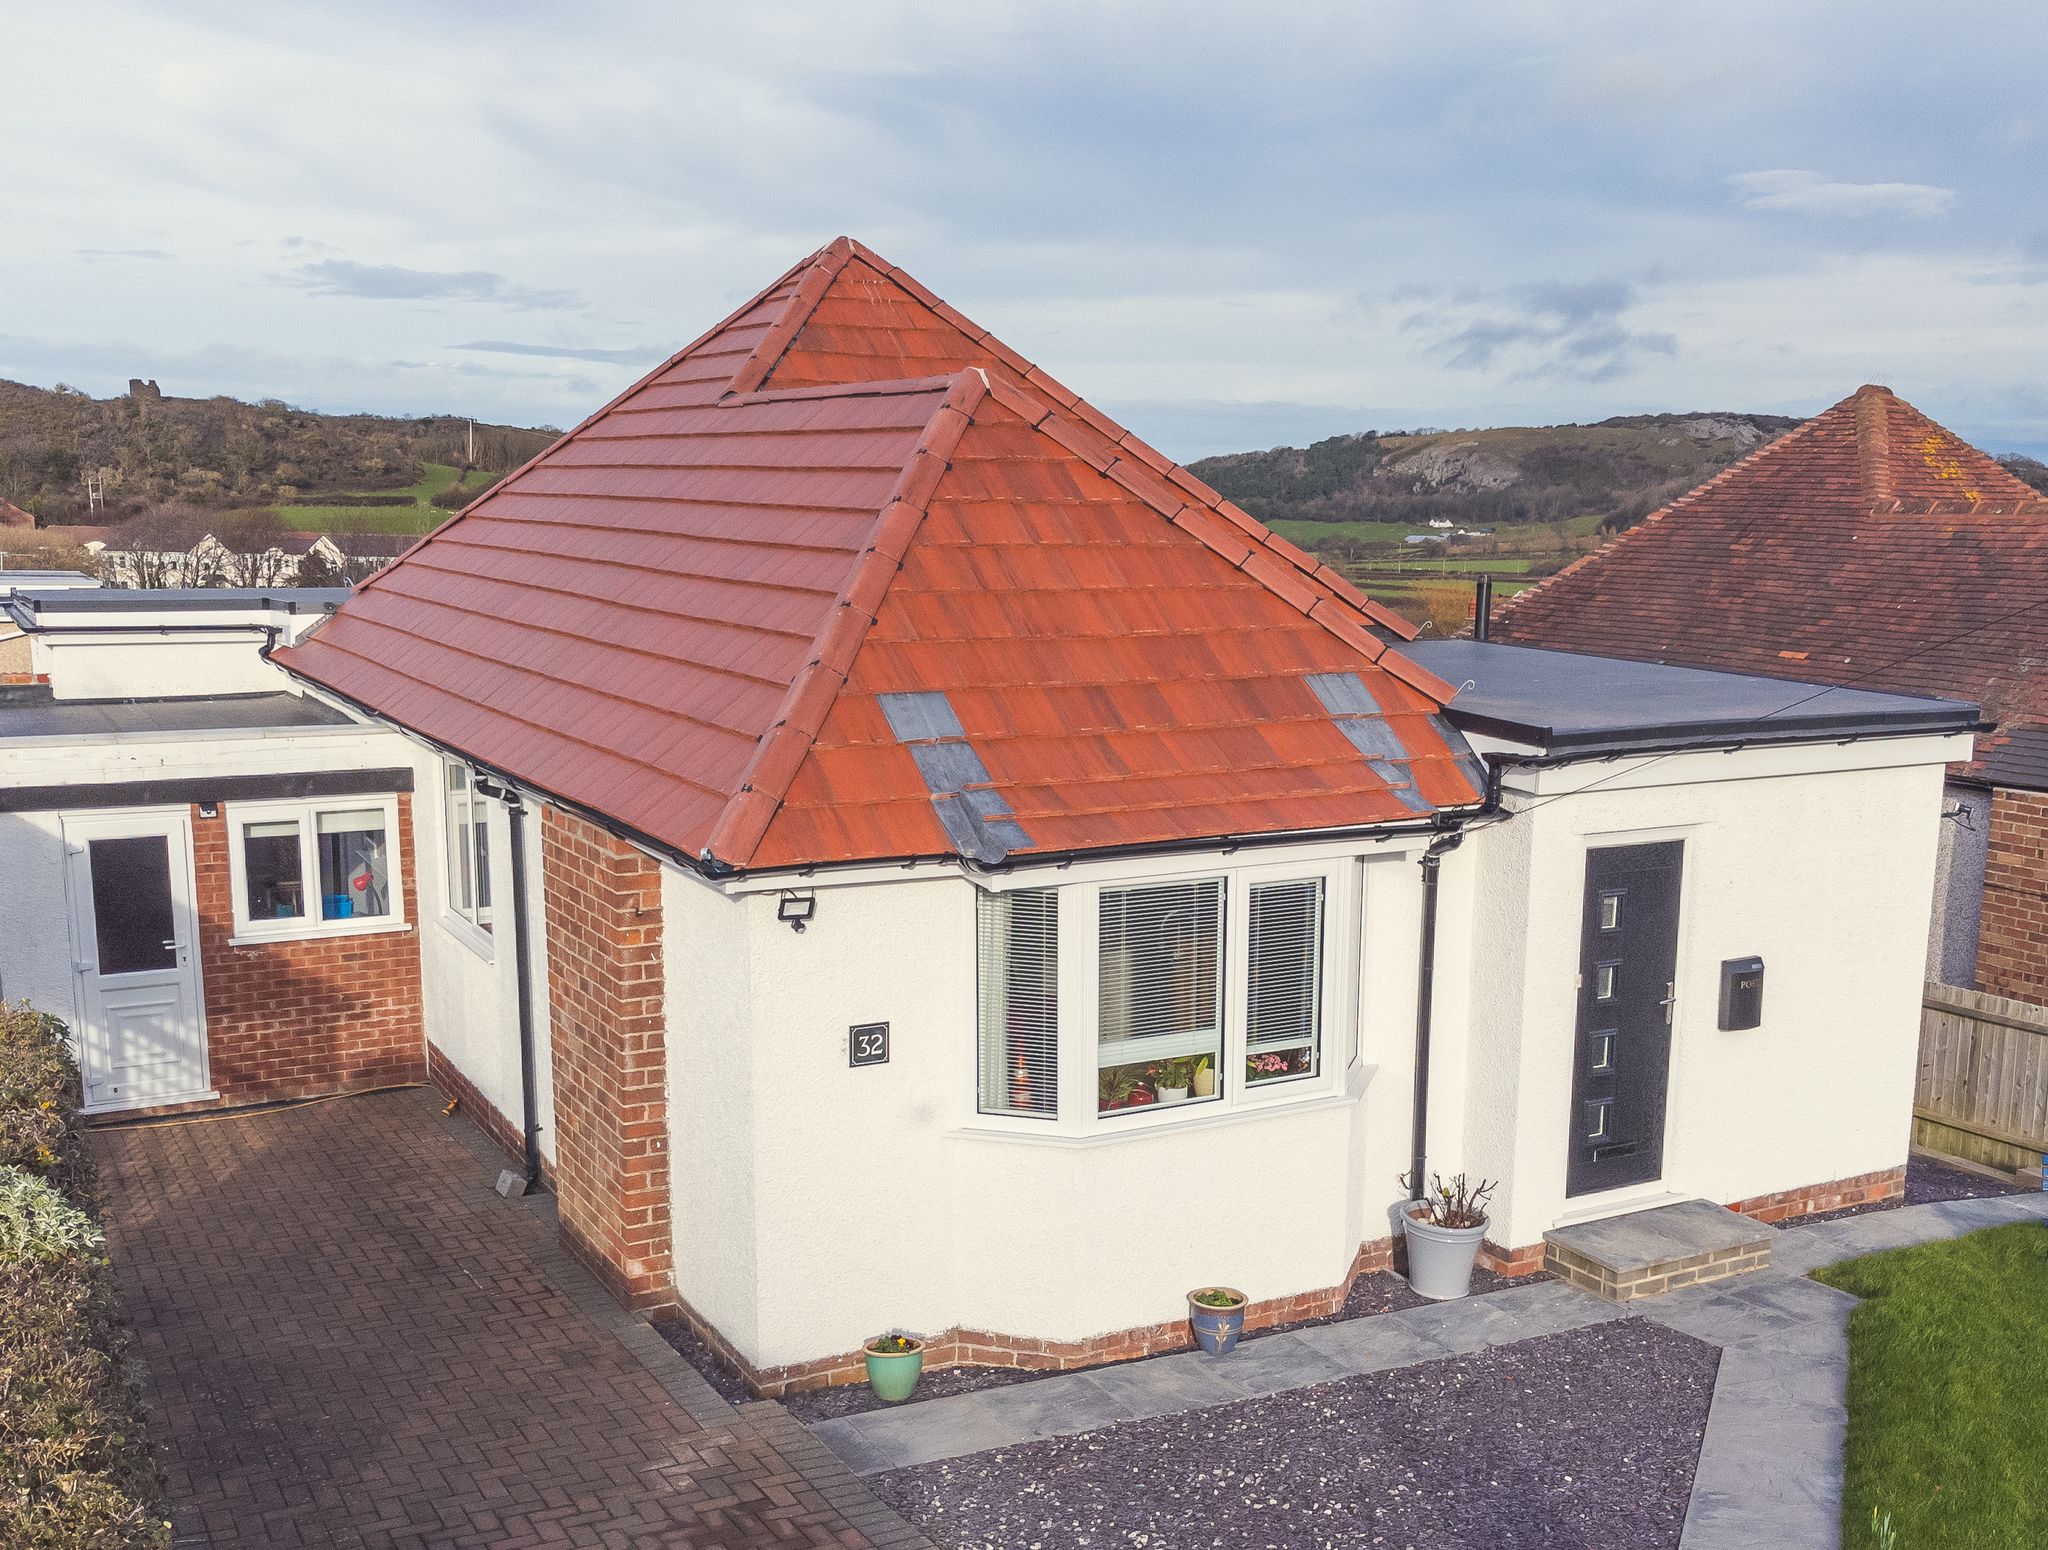 Tile Roof Contractors Wern y Wylan, LL58 - DD Roofing